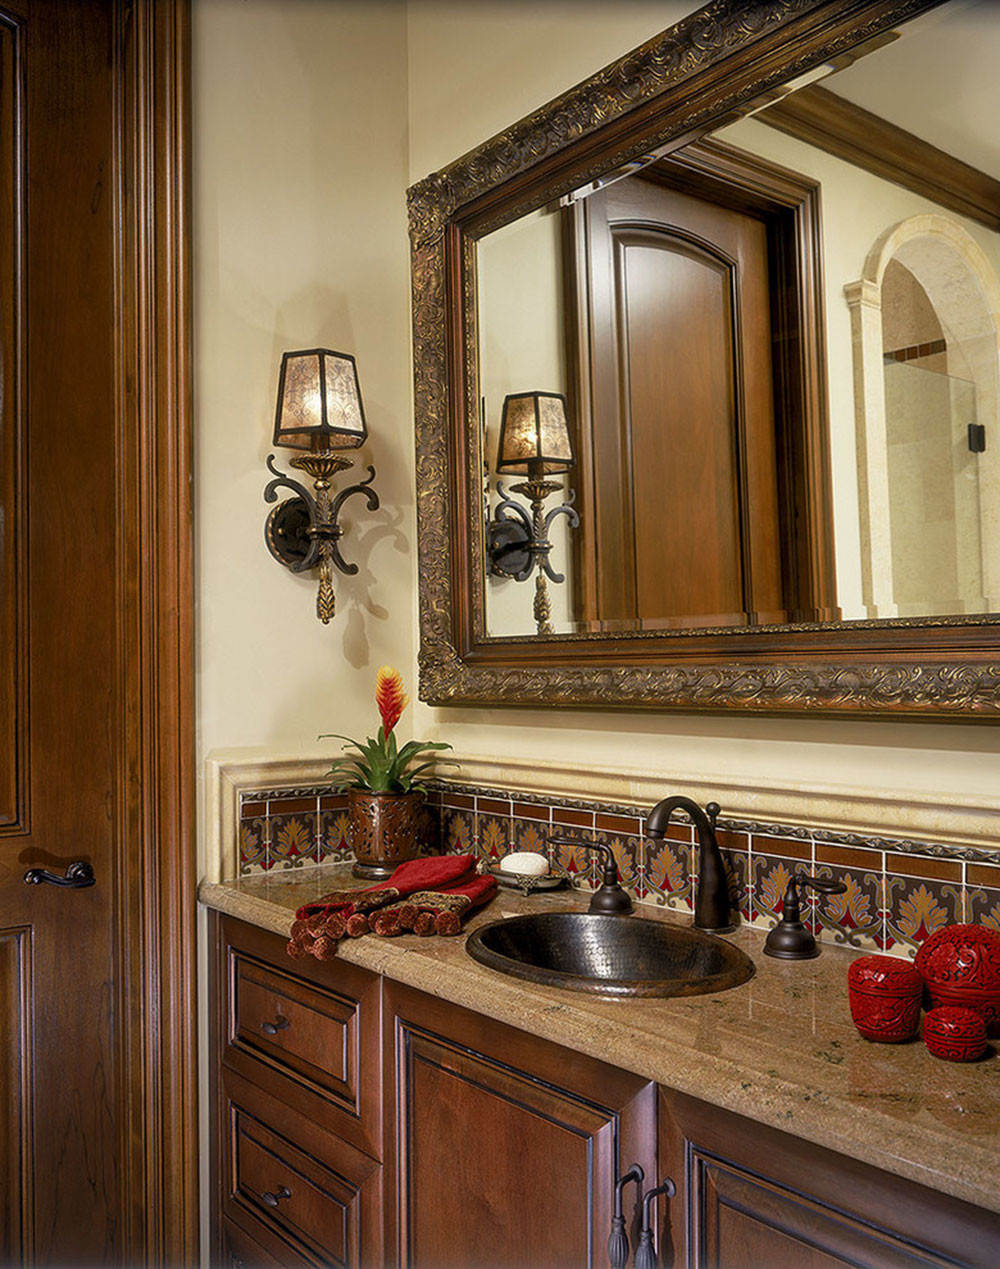 Tuscany-Style-Bedroom-Suite-Bath-by-Wesley-Design-Inc Bathroom décor ideas you should try in your home